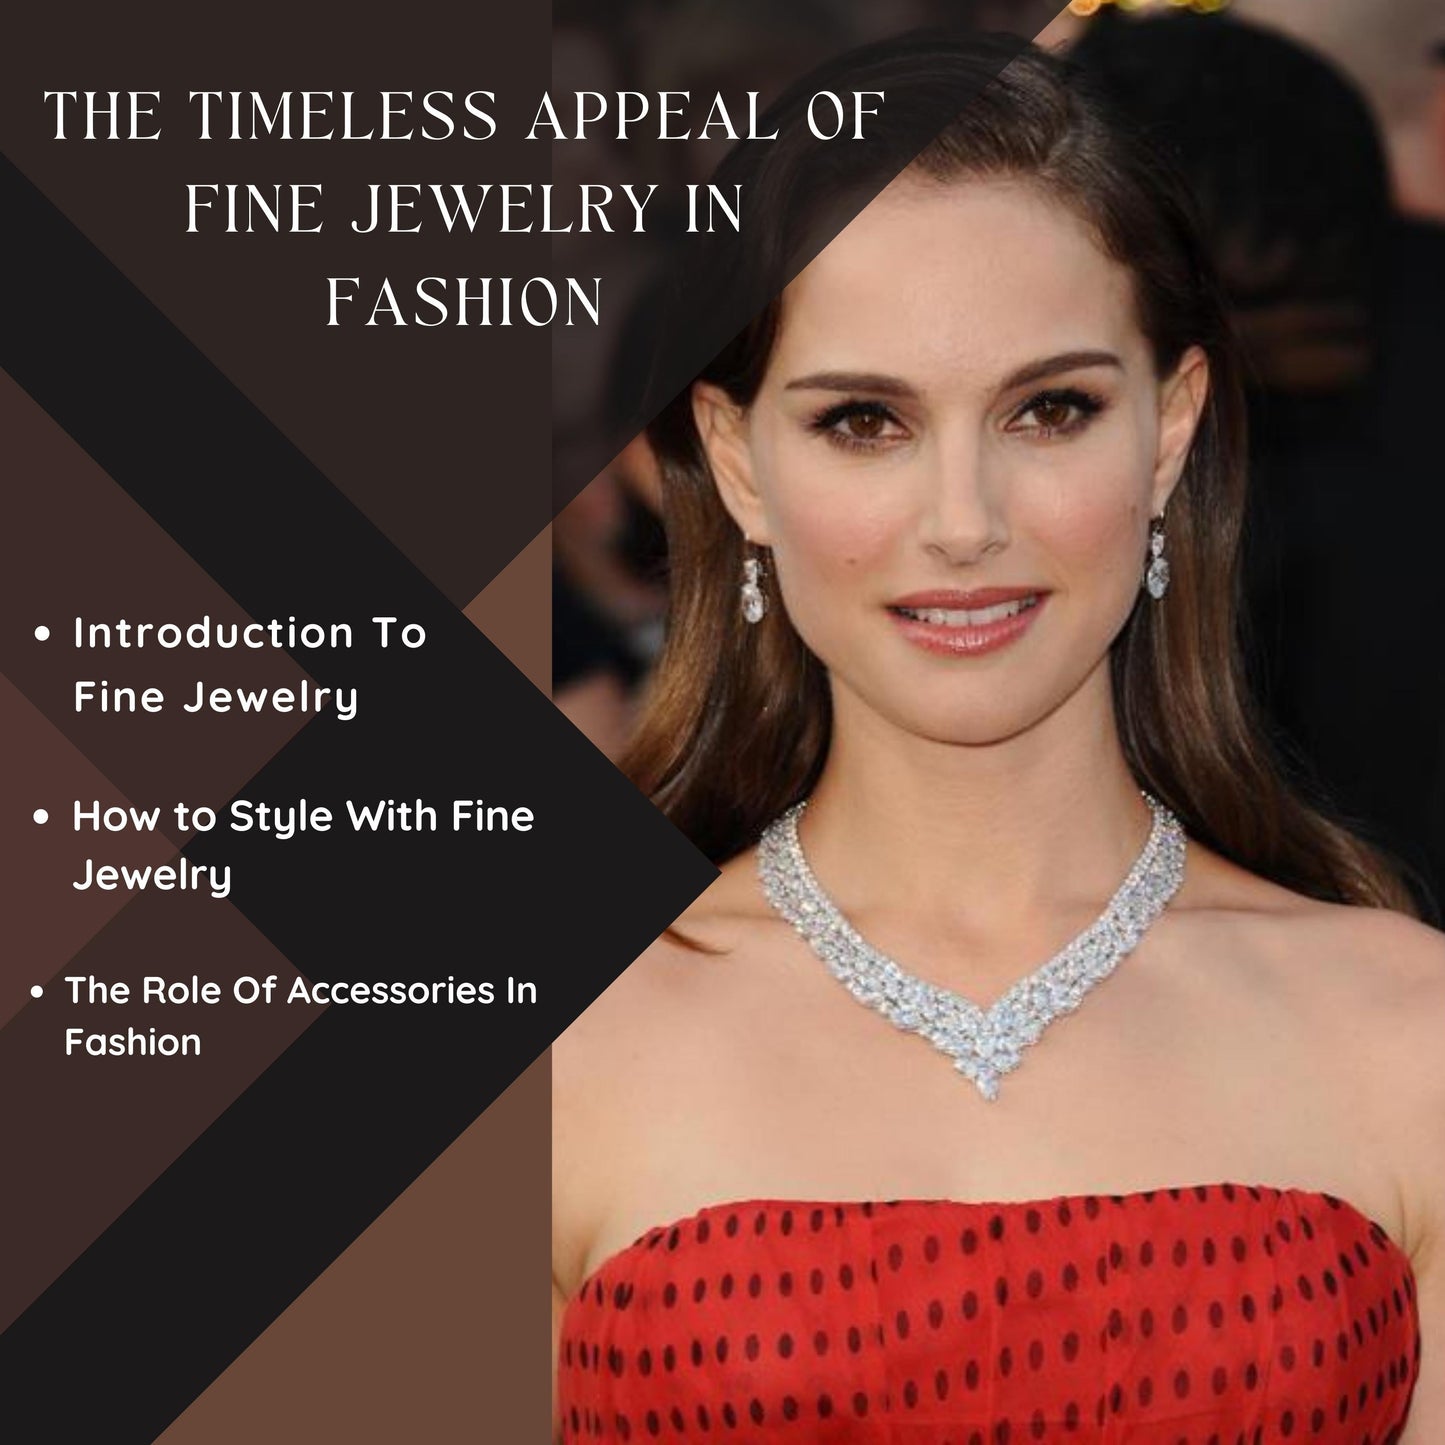 The Timeless Appeal of Fine Jewelry in Fashion